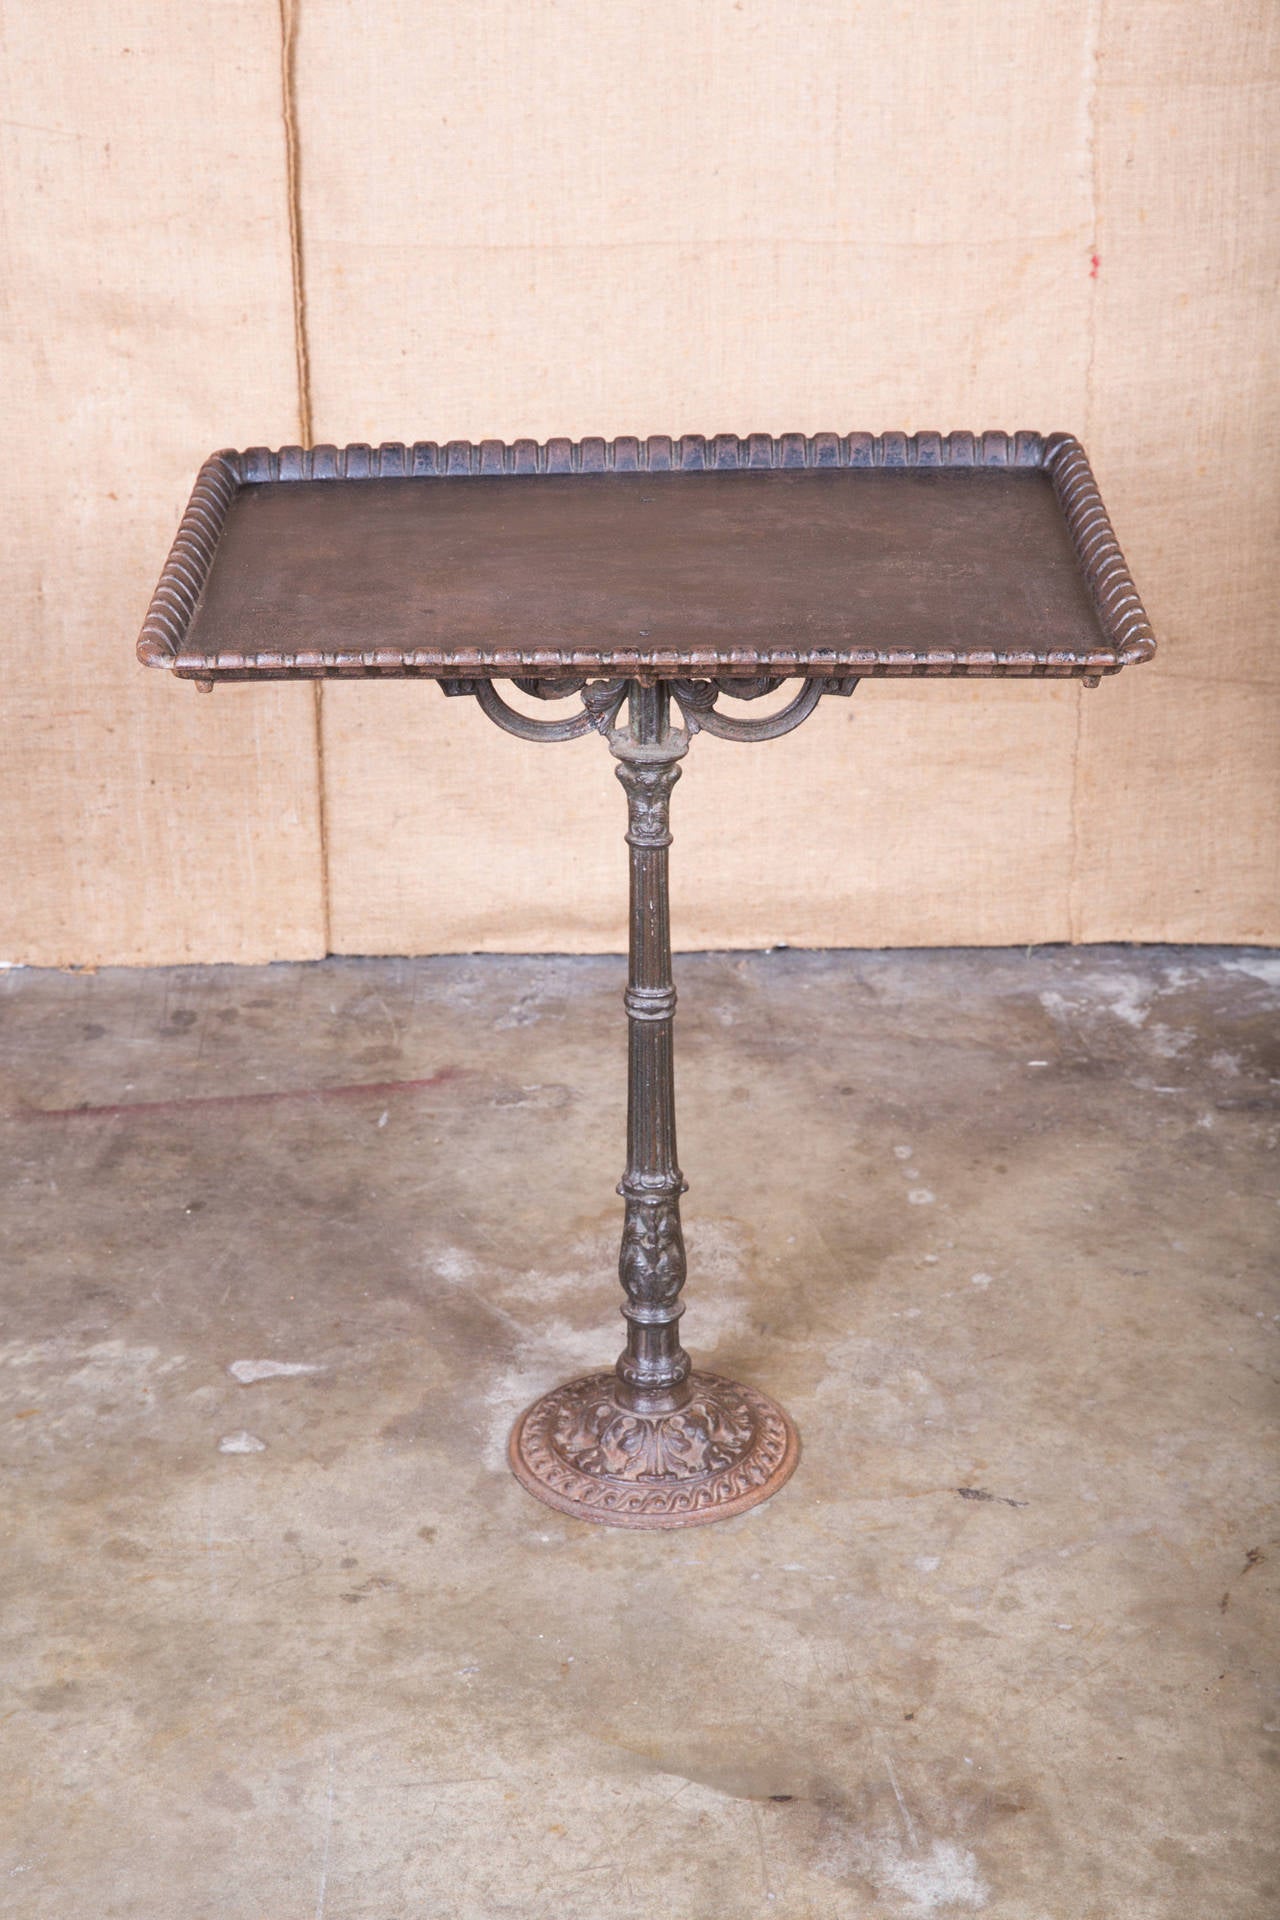 Cast iron dessert table once used at La Flottille Restaurant on the grounds of the Palace of Versailles. This charming table was anchored to the terrace and used to present delicious French desserts in the early 1900s. Original patina. Perfect for